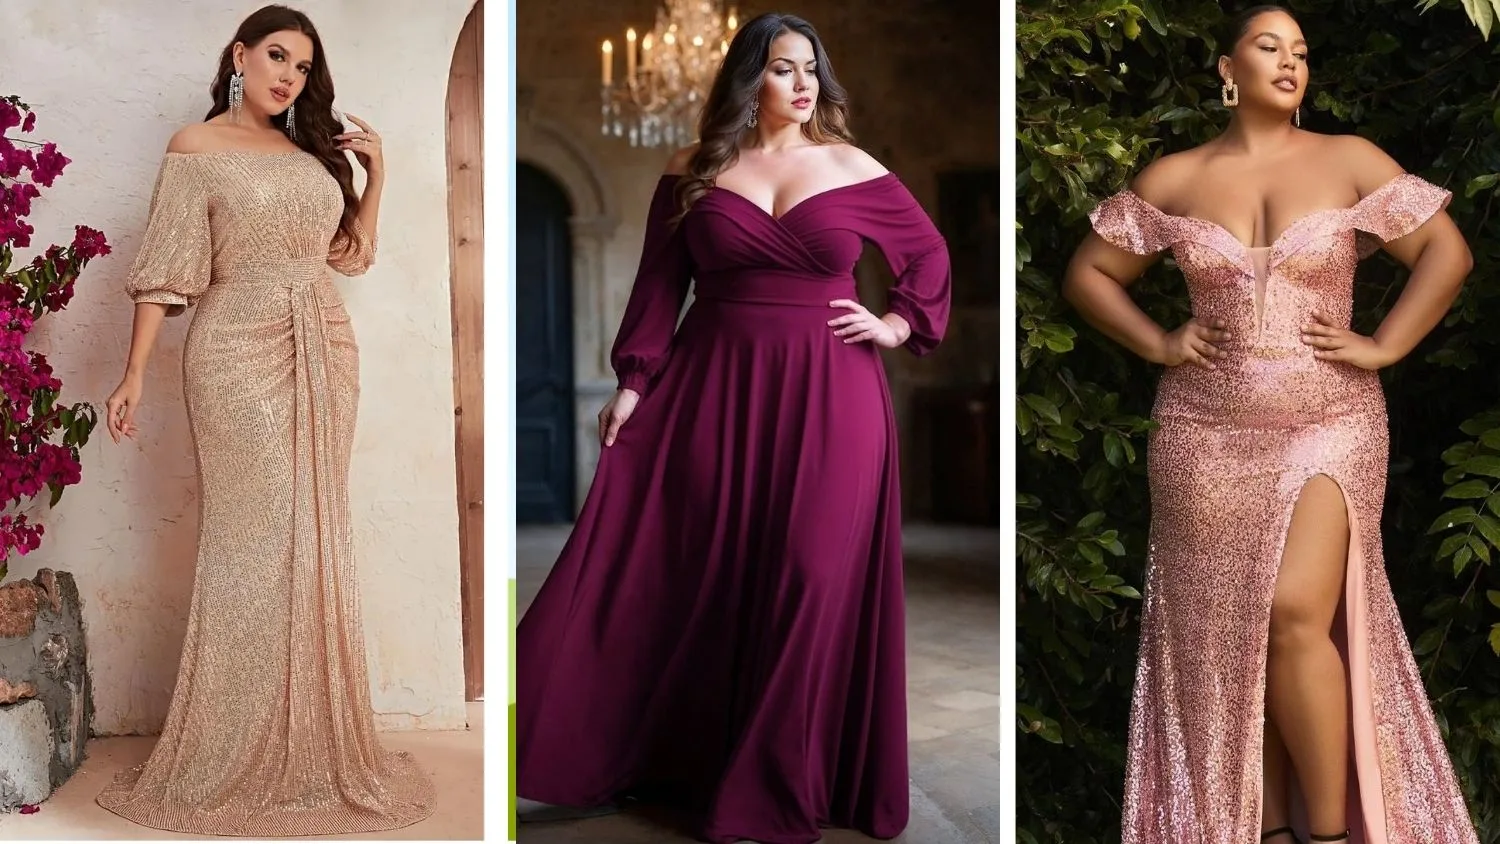 10 Jaw-Dropping Prom Inspo Dresses For The Plus Size Diva